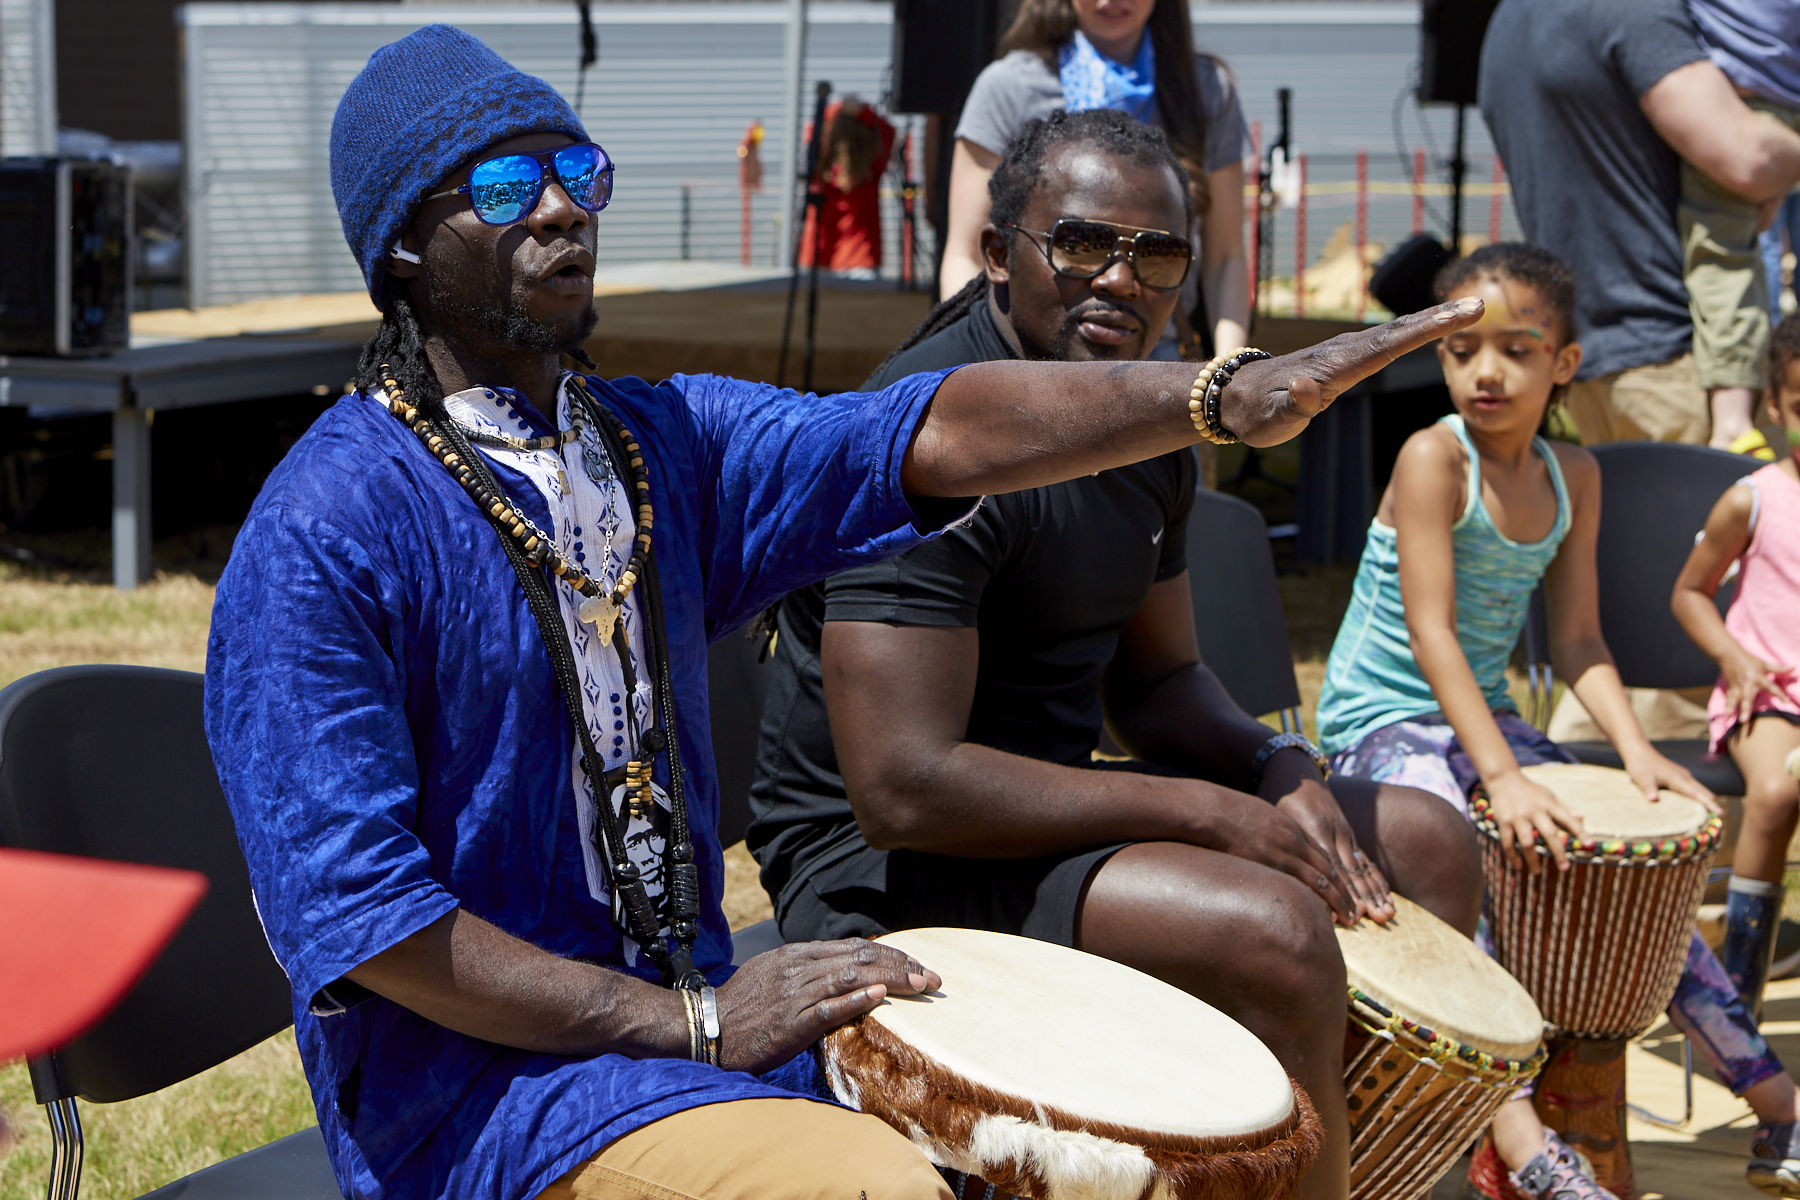 Photo of a man wearing a blue dashiki, sunglasses, and blue knit cap (Diali Cissokho) sits behind his drum and holds out his hand to demonstrate how to play, while a man wearing sunglasses, and a small girl, both with drums, watch